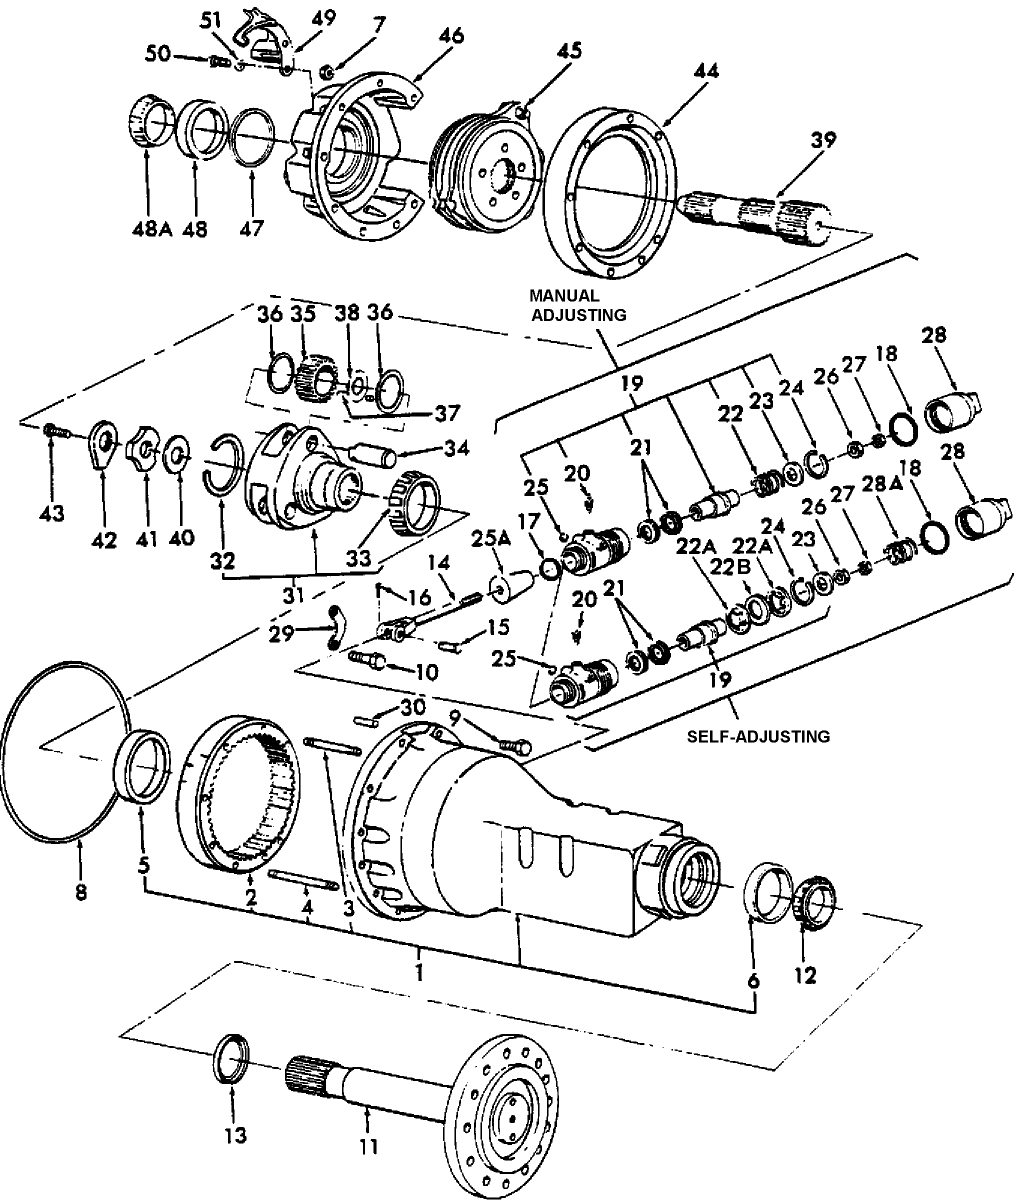 04A01 AXLE ASSEMBLY & RELATED PARTS, FRONT - A62, REAR - A62, A64